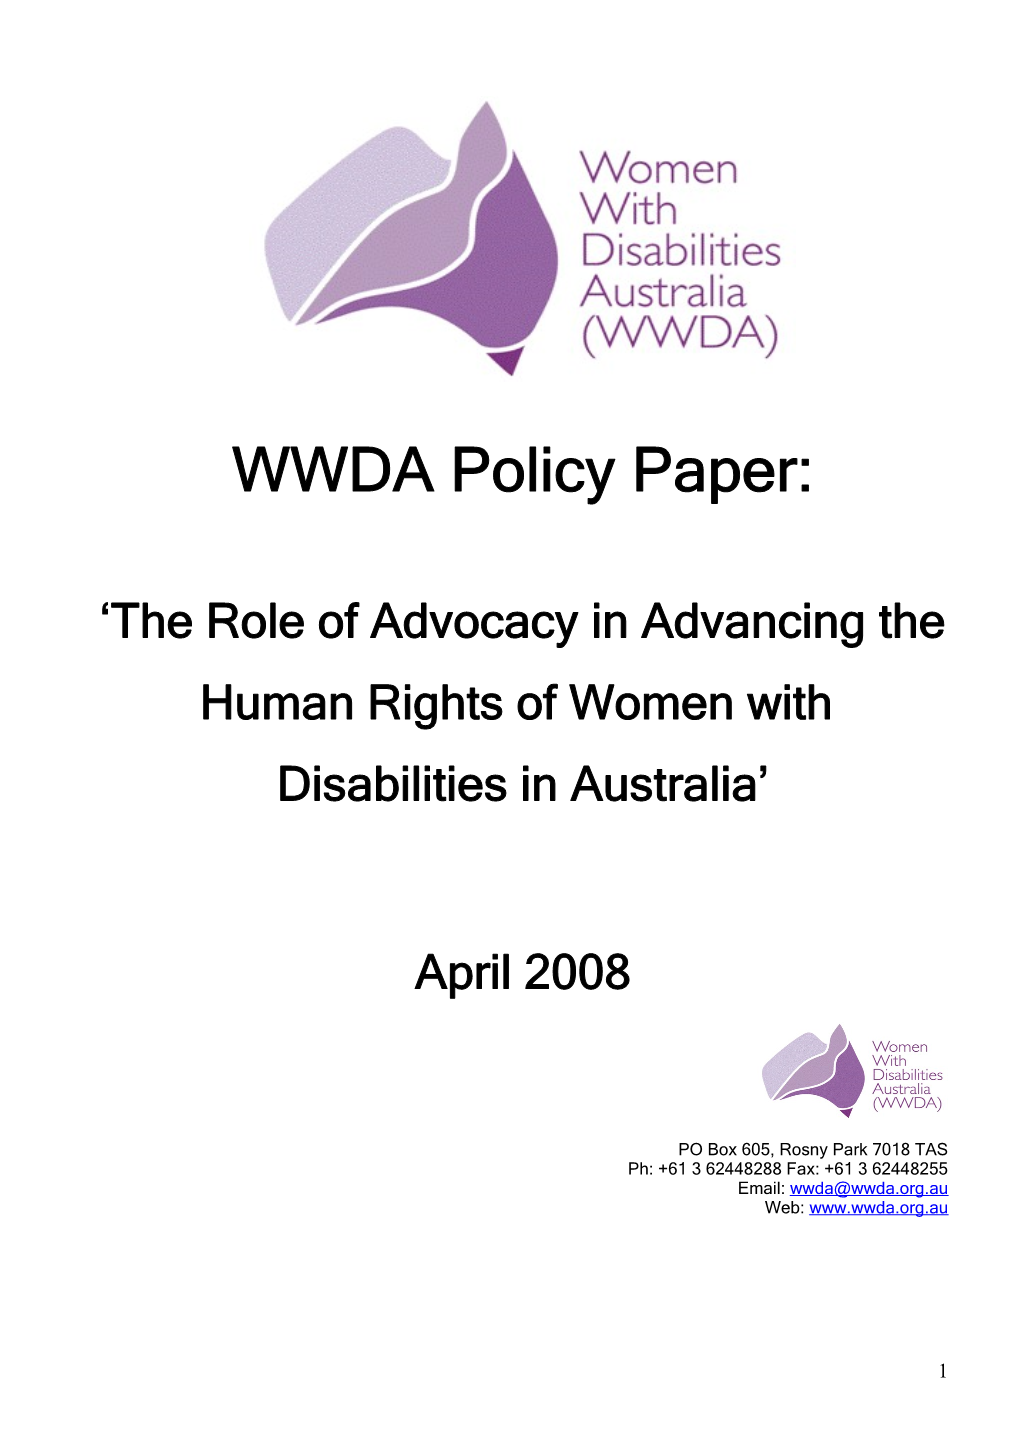 The Role of Advocacy in Advancing the Human Rights of Women With